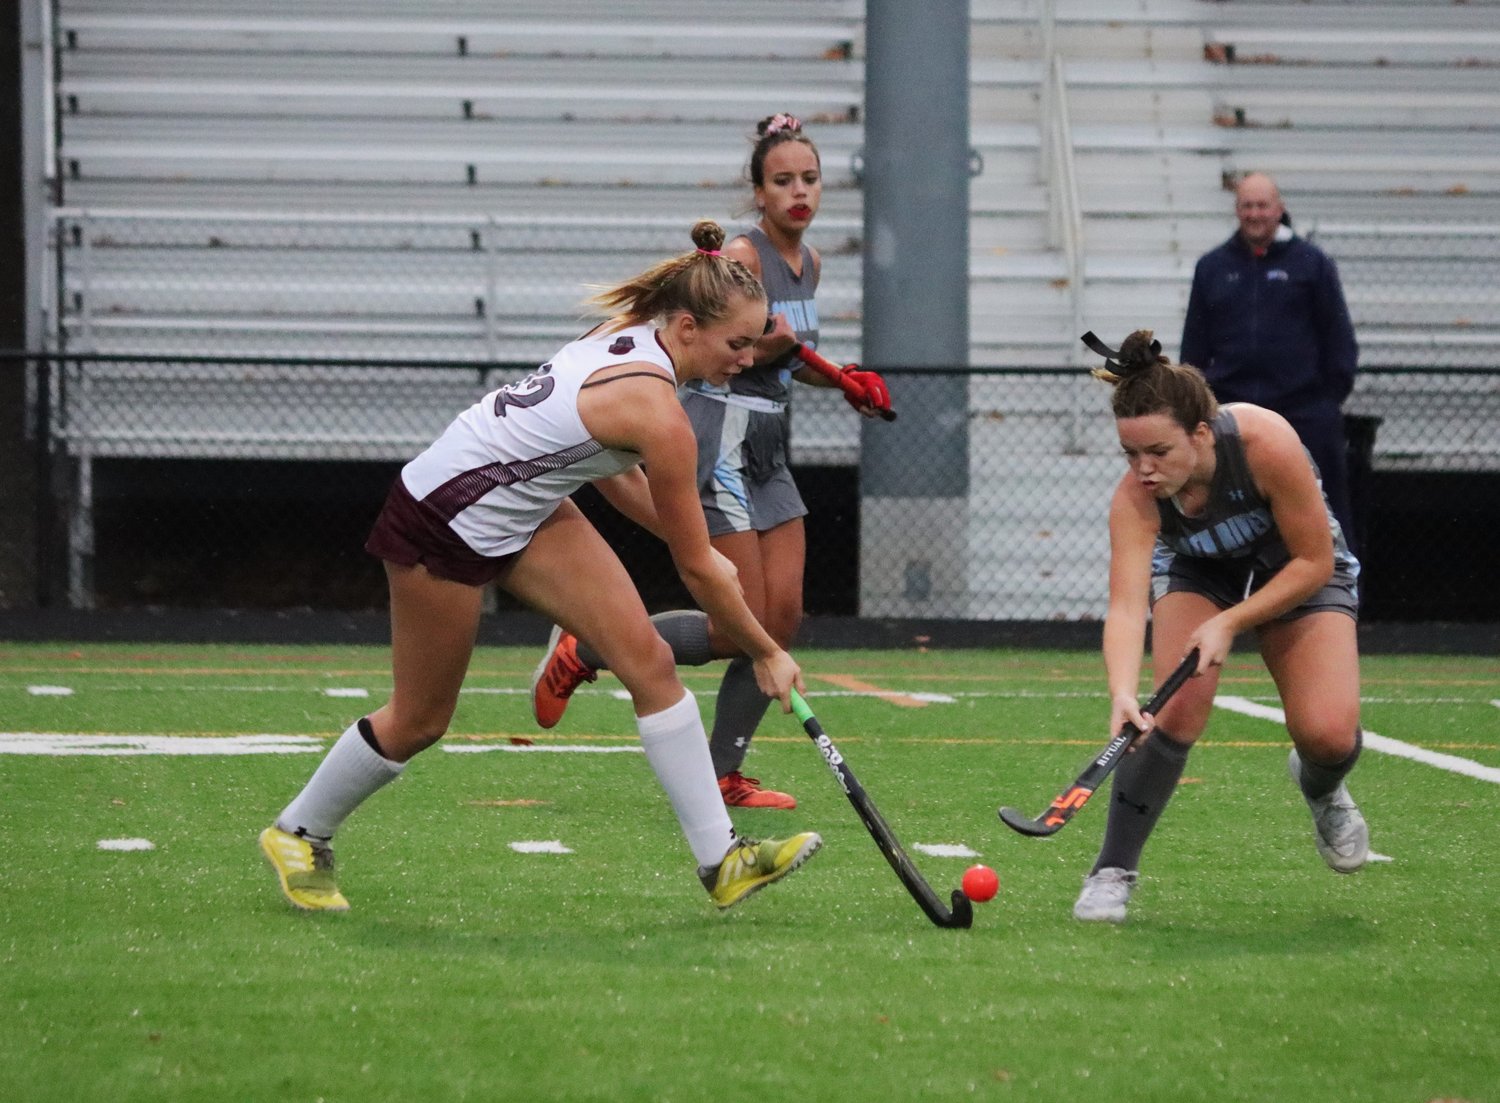 Chloe Page had two assists in the Broadneck win.